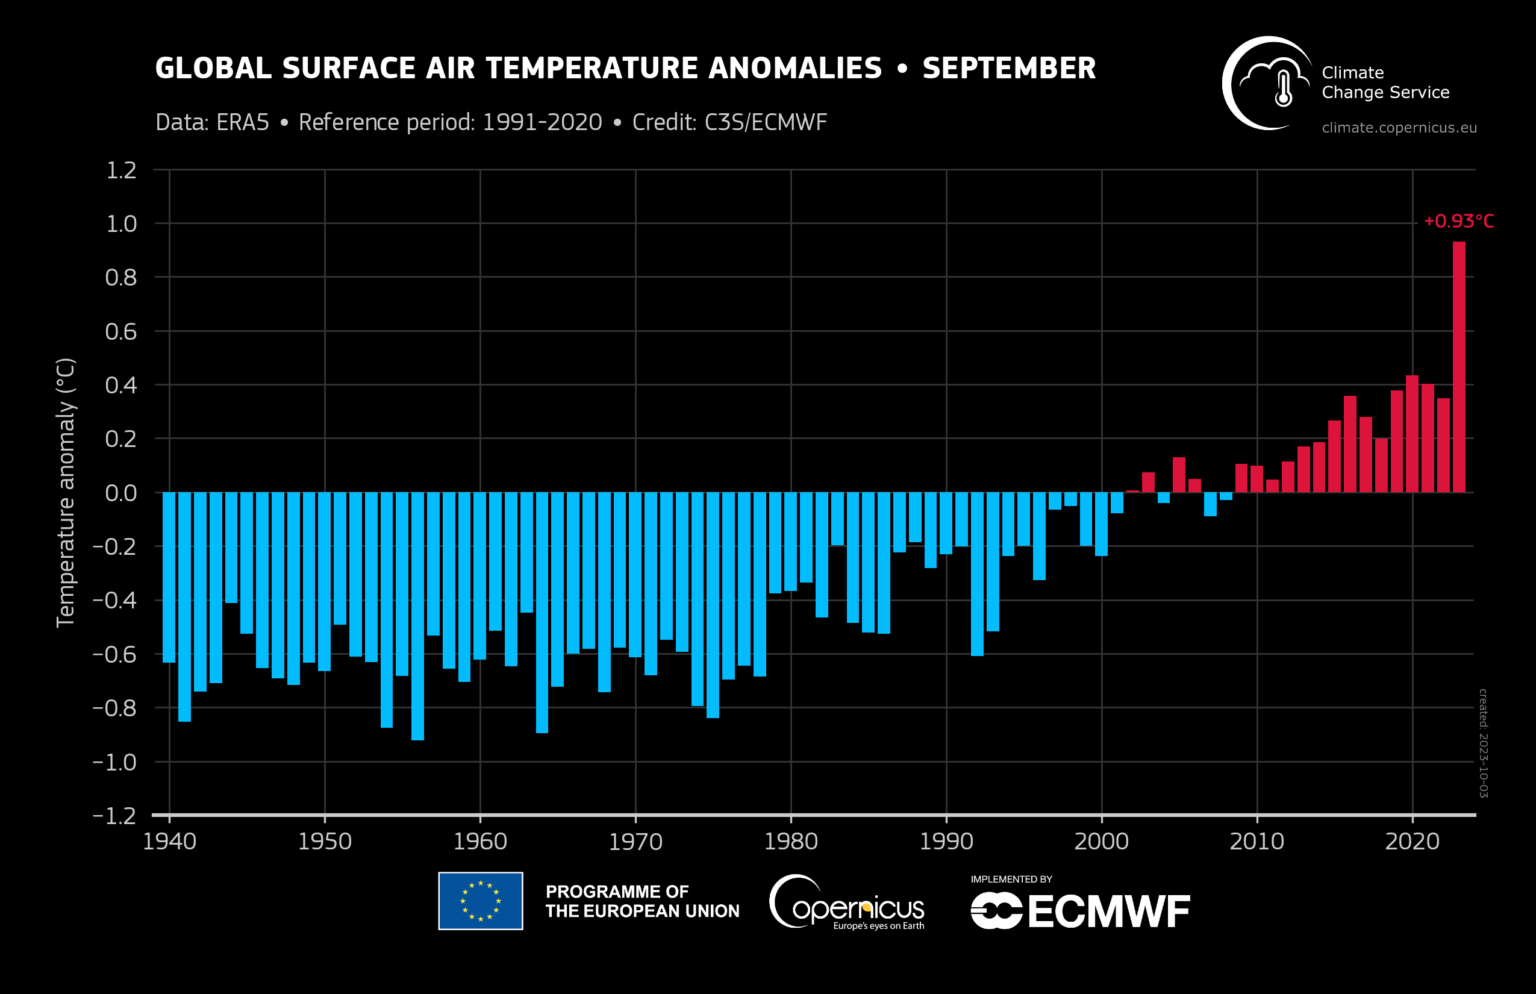 Globally averaged surface air temperature anomalies relative to 1991–2020 for each September from 1940 to 2023